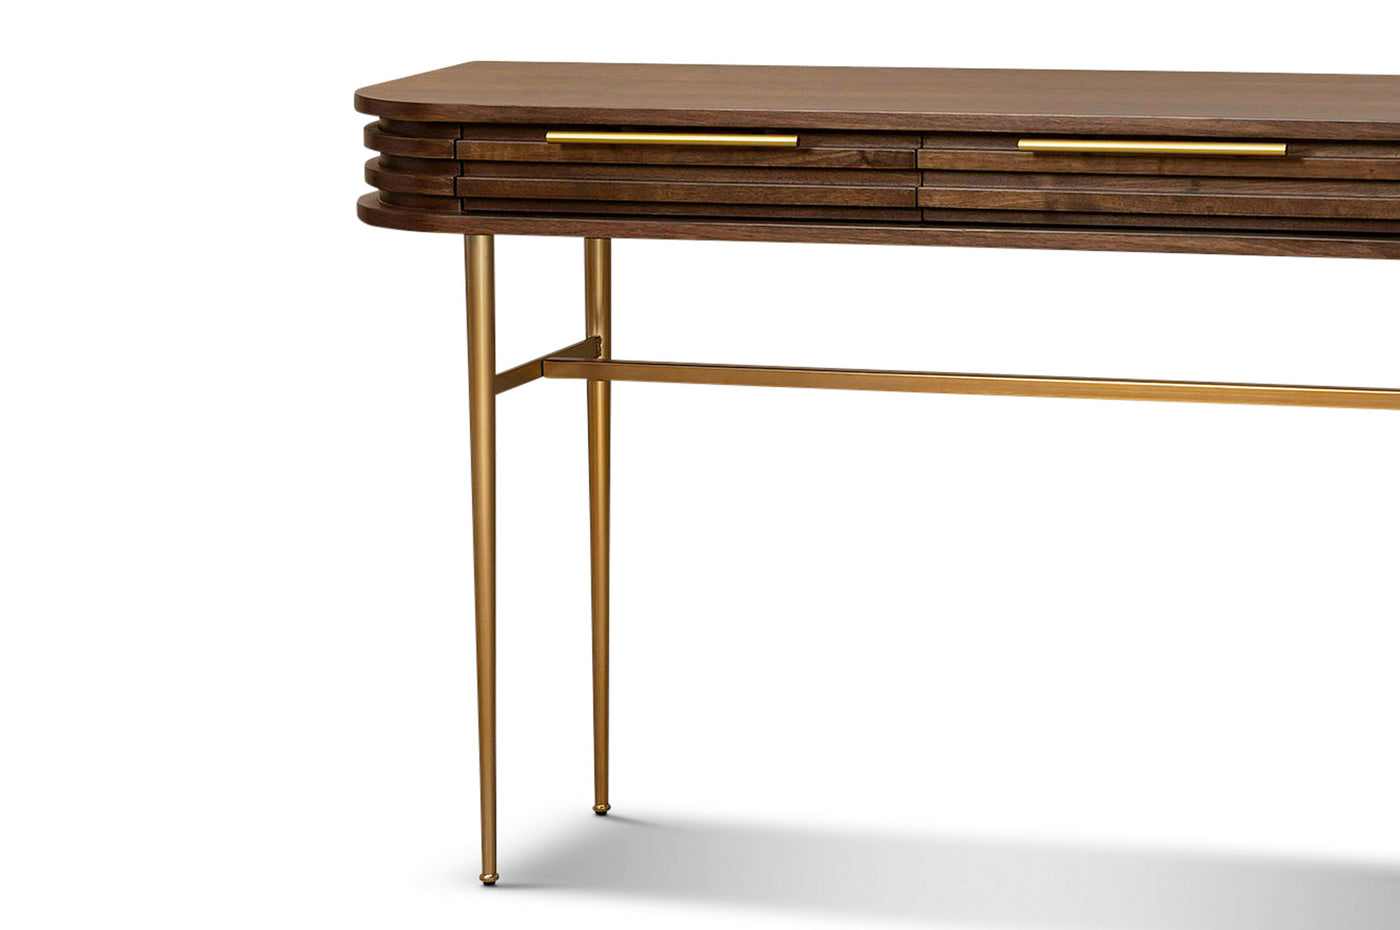 Berkeley Designs Paris Natural Walnut Console Table with Gold Brass Handles